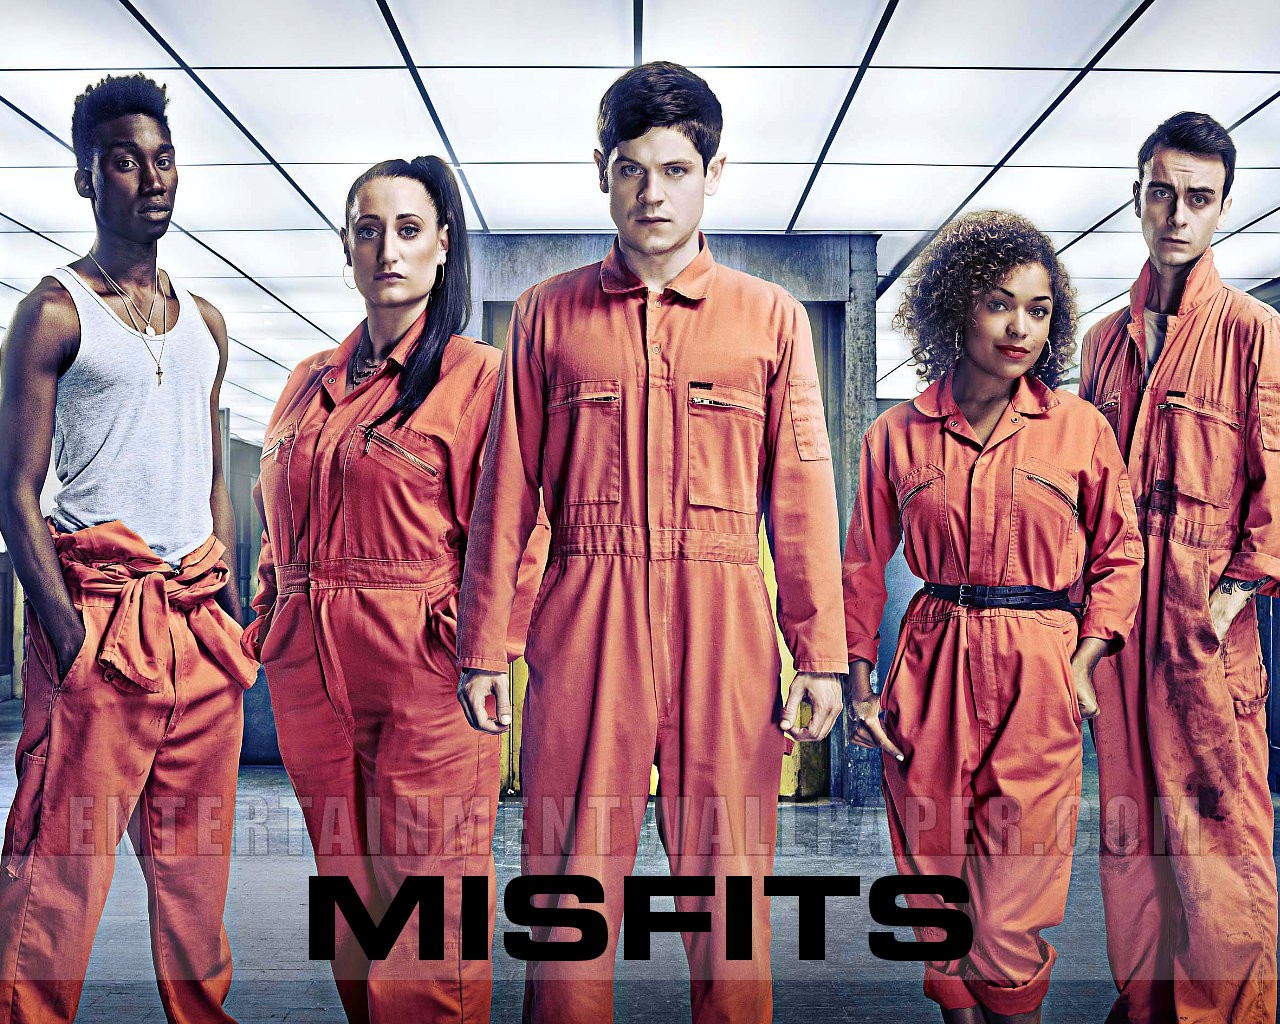 Misfits E4 images Misfits Series 3 HD wallpaper and background